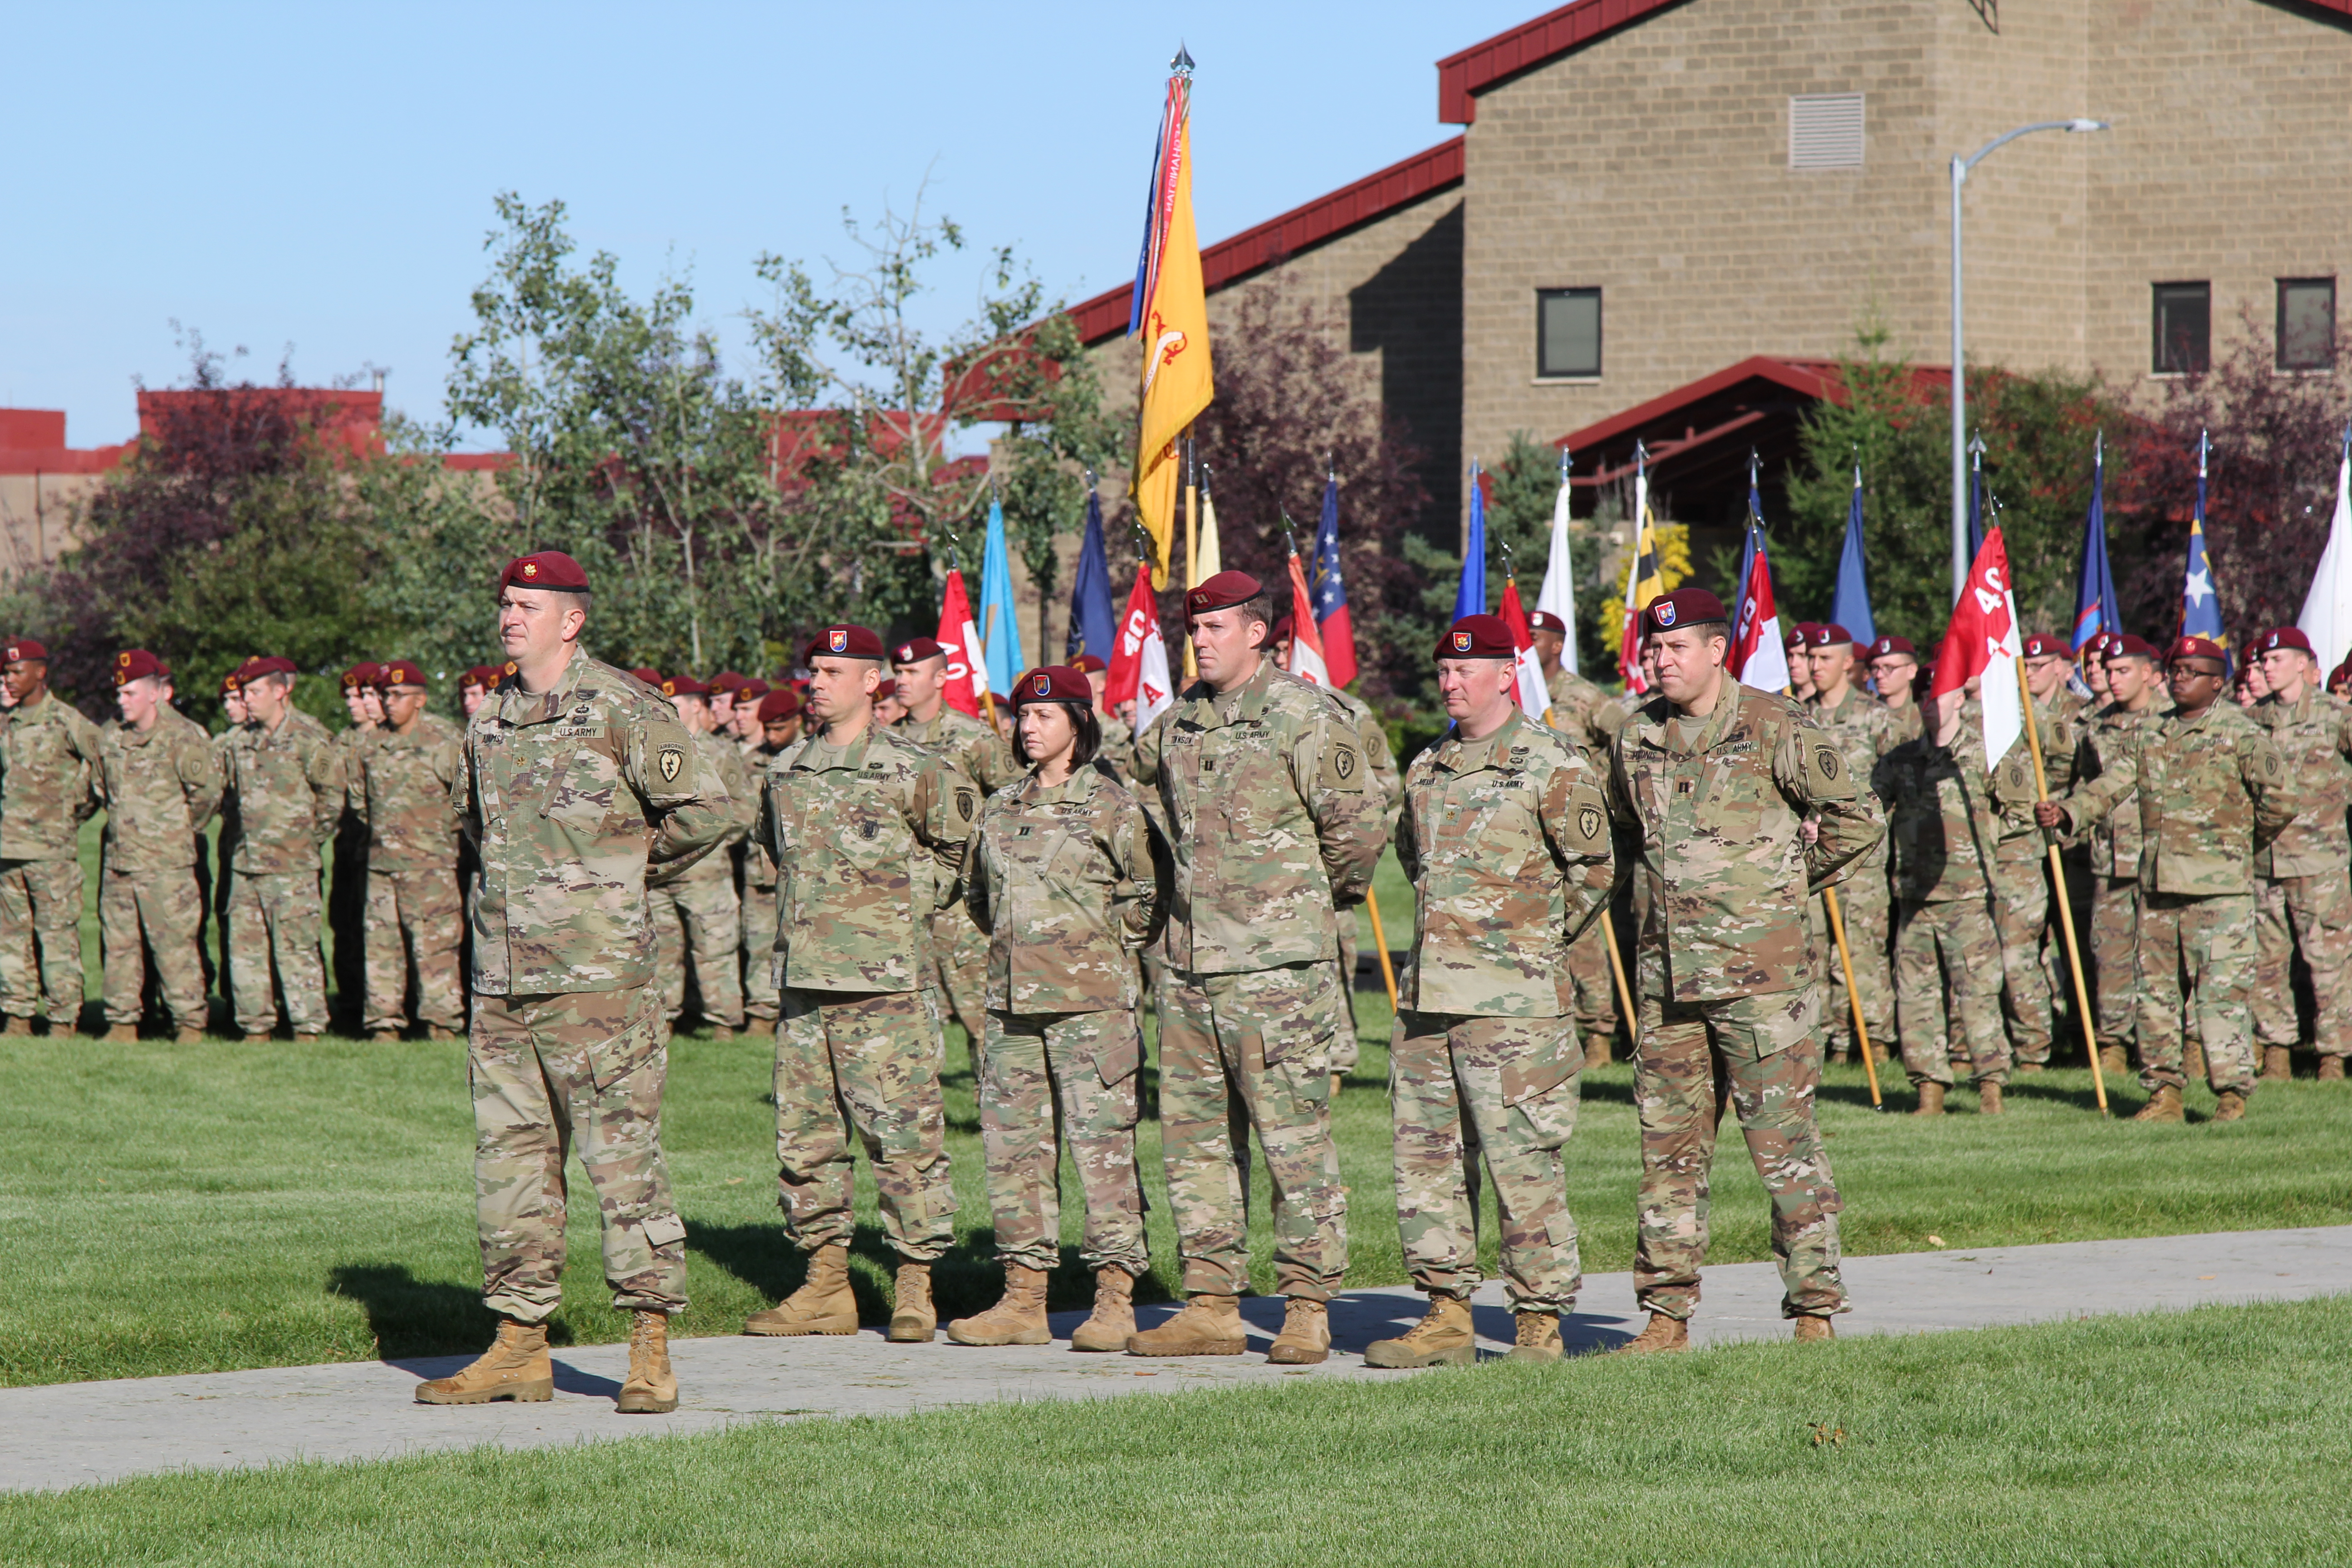 Soldiers with the Army’s 4th Brigade Combat Team (Airborne) 25th Infantry Division at a deployment ceremony Sept. 8th, 2017, at Joint Base Elmendorf-Richardson. (Photo by Zachariah Hughes/Alaska Public Media)